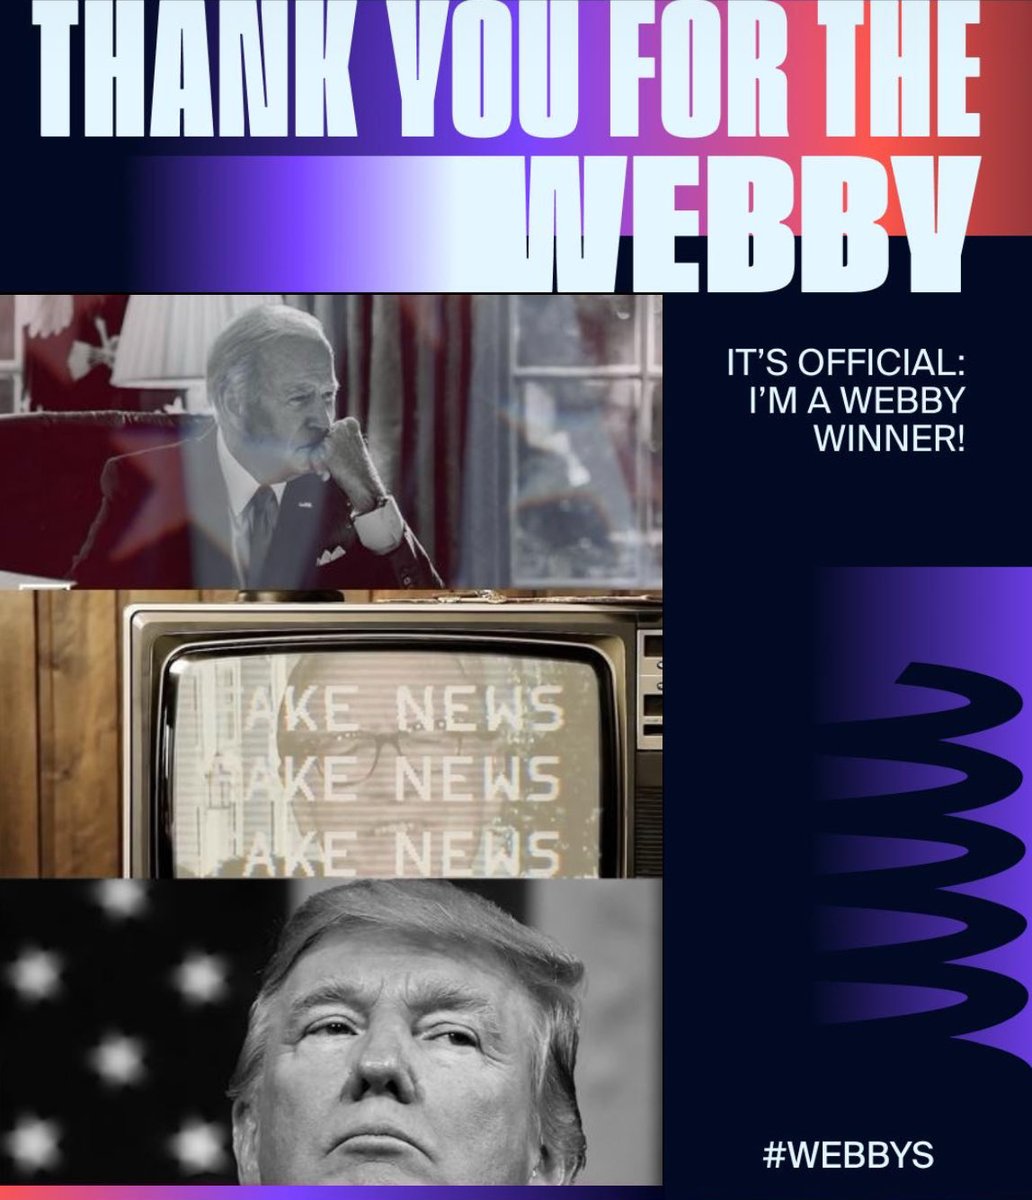 🏴‍☠️ We're excited and incredibly honored to announce that we're winners of a People's Voice #Webby award🏆 for our America or Trump campaign. We'd like to thank all of our supporters, because without you our vital work is not possible.